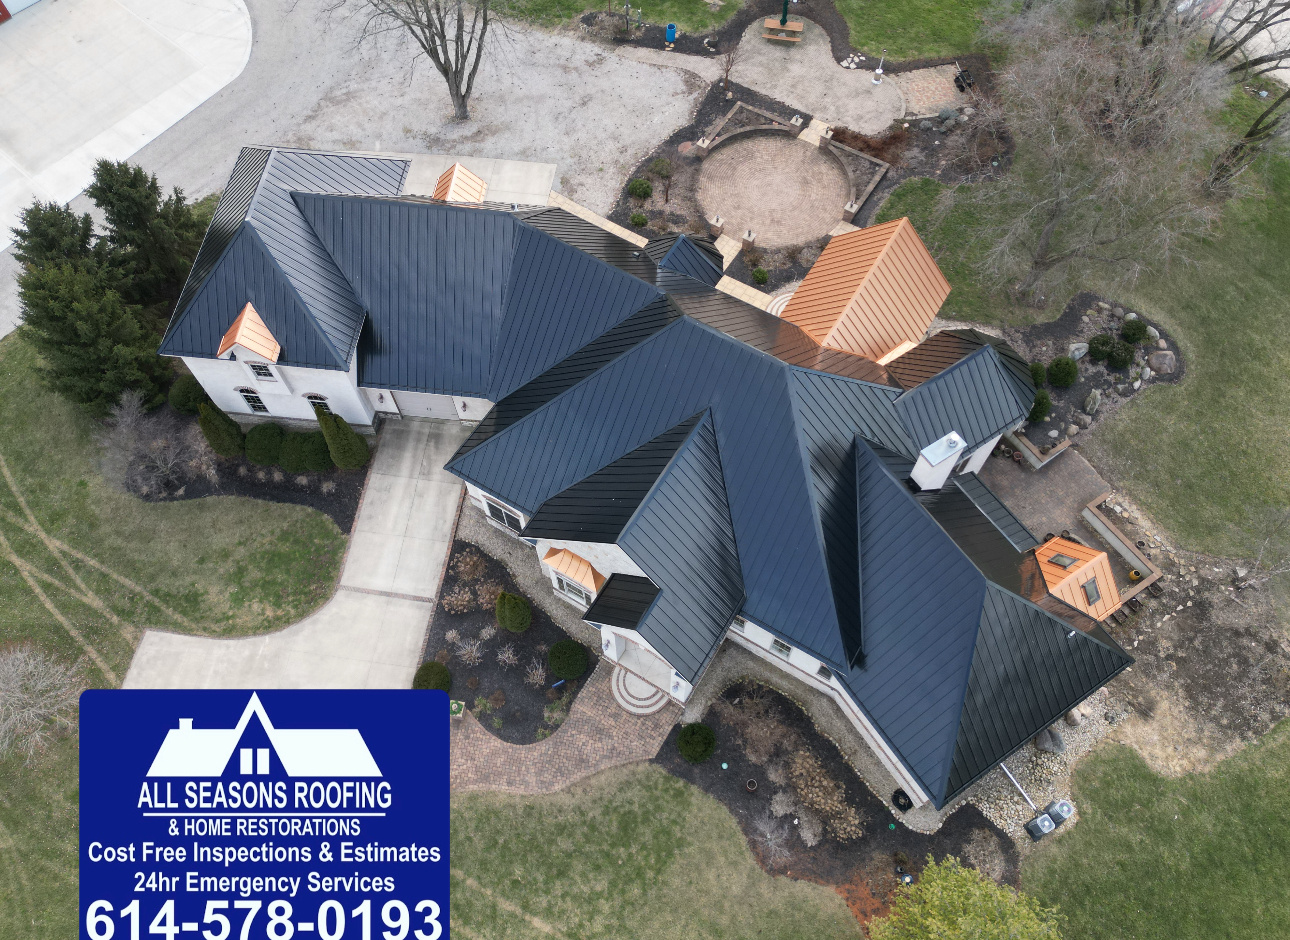 All Seasons Roofing And Home Restorations